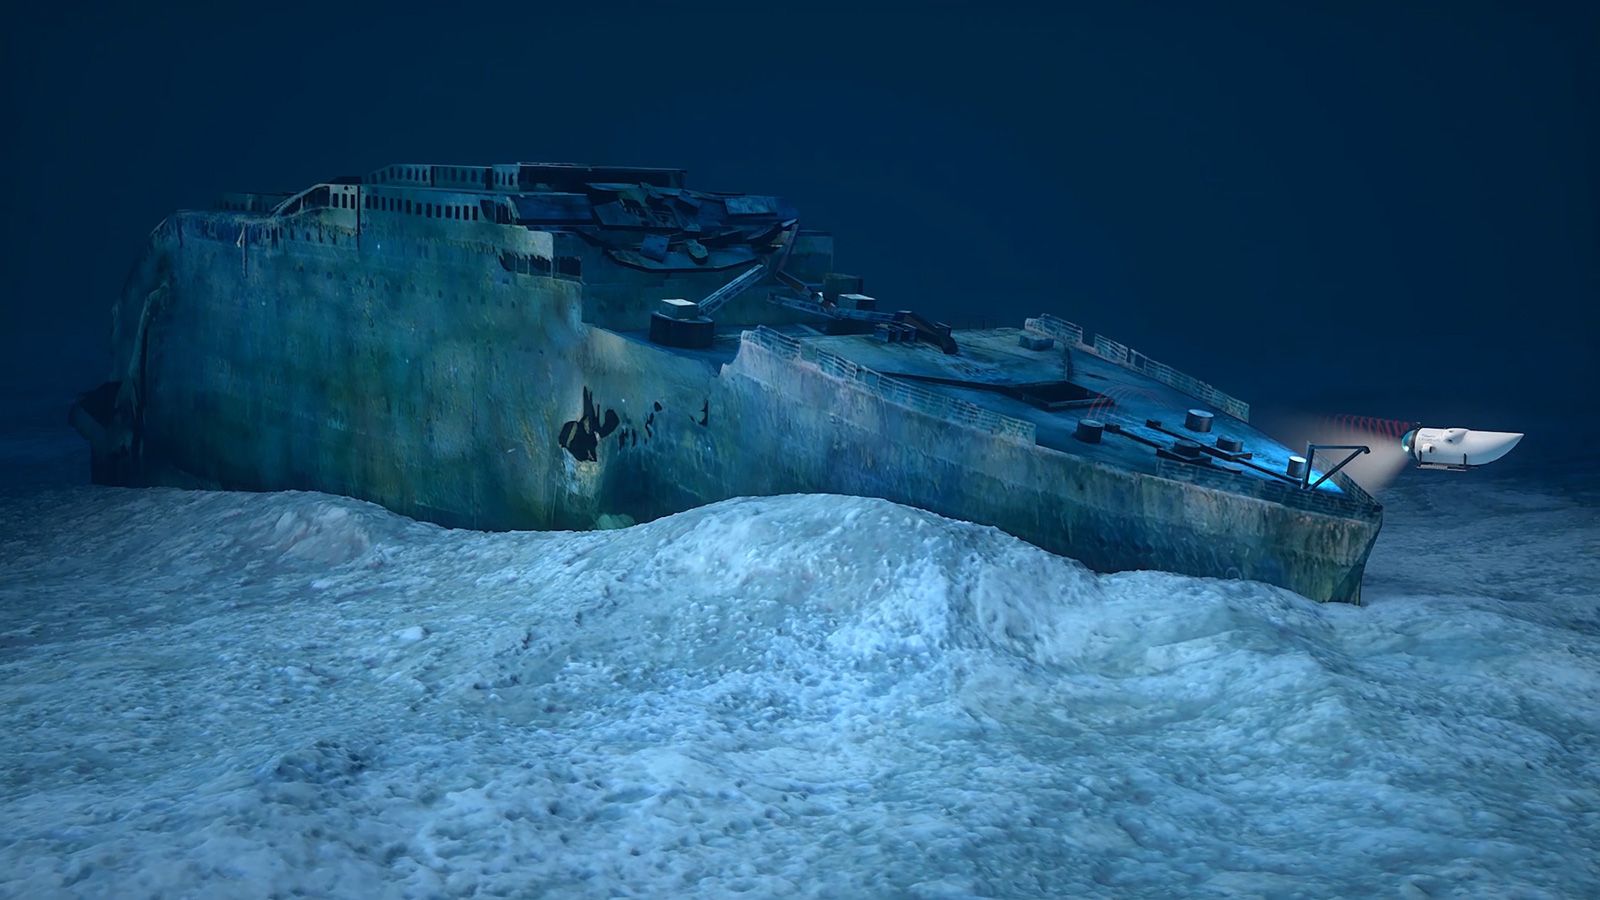 Diving tours of Titanic wreck site to begin in 2019